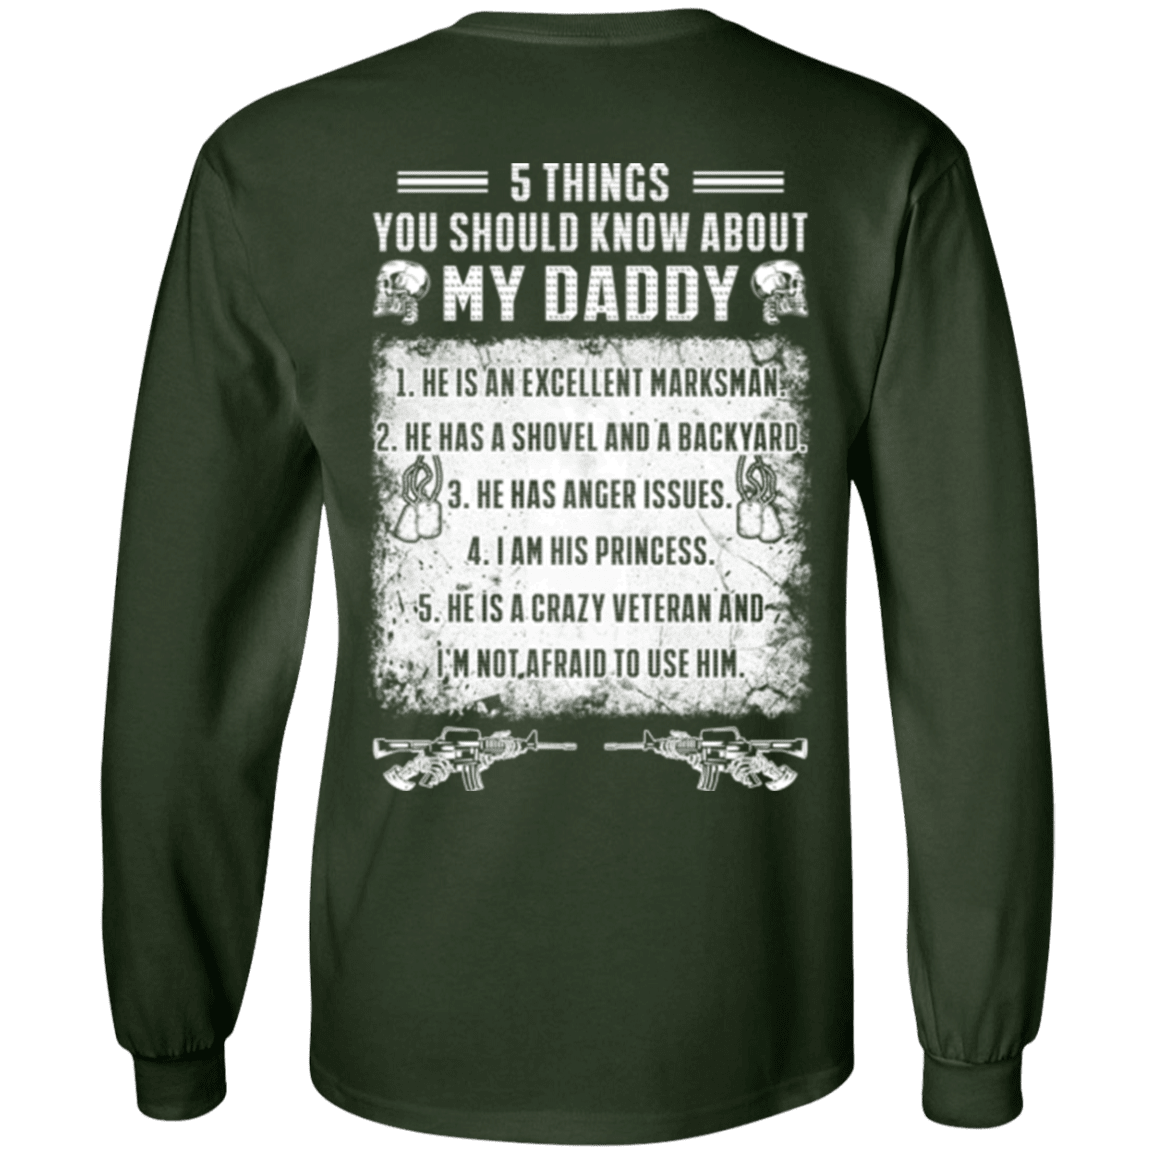 Military T-Shirt "5 Things You Should Know About My Daddy Veteran"-TShirt-General-Veterans Nation